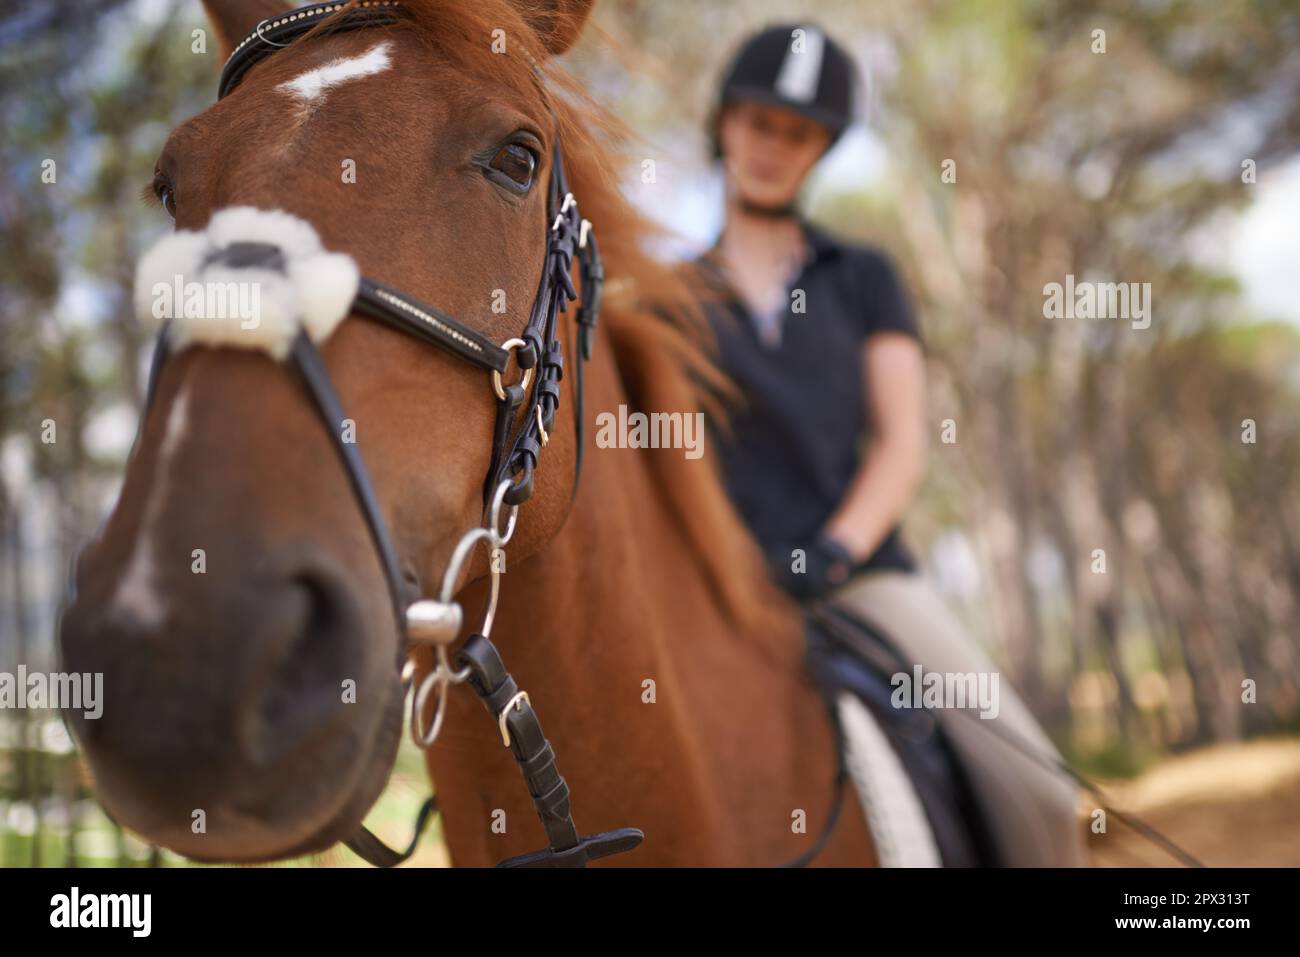 Experiencing nature on horseback. A young woman going for a ride on her chestnut horse. Stock Photo